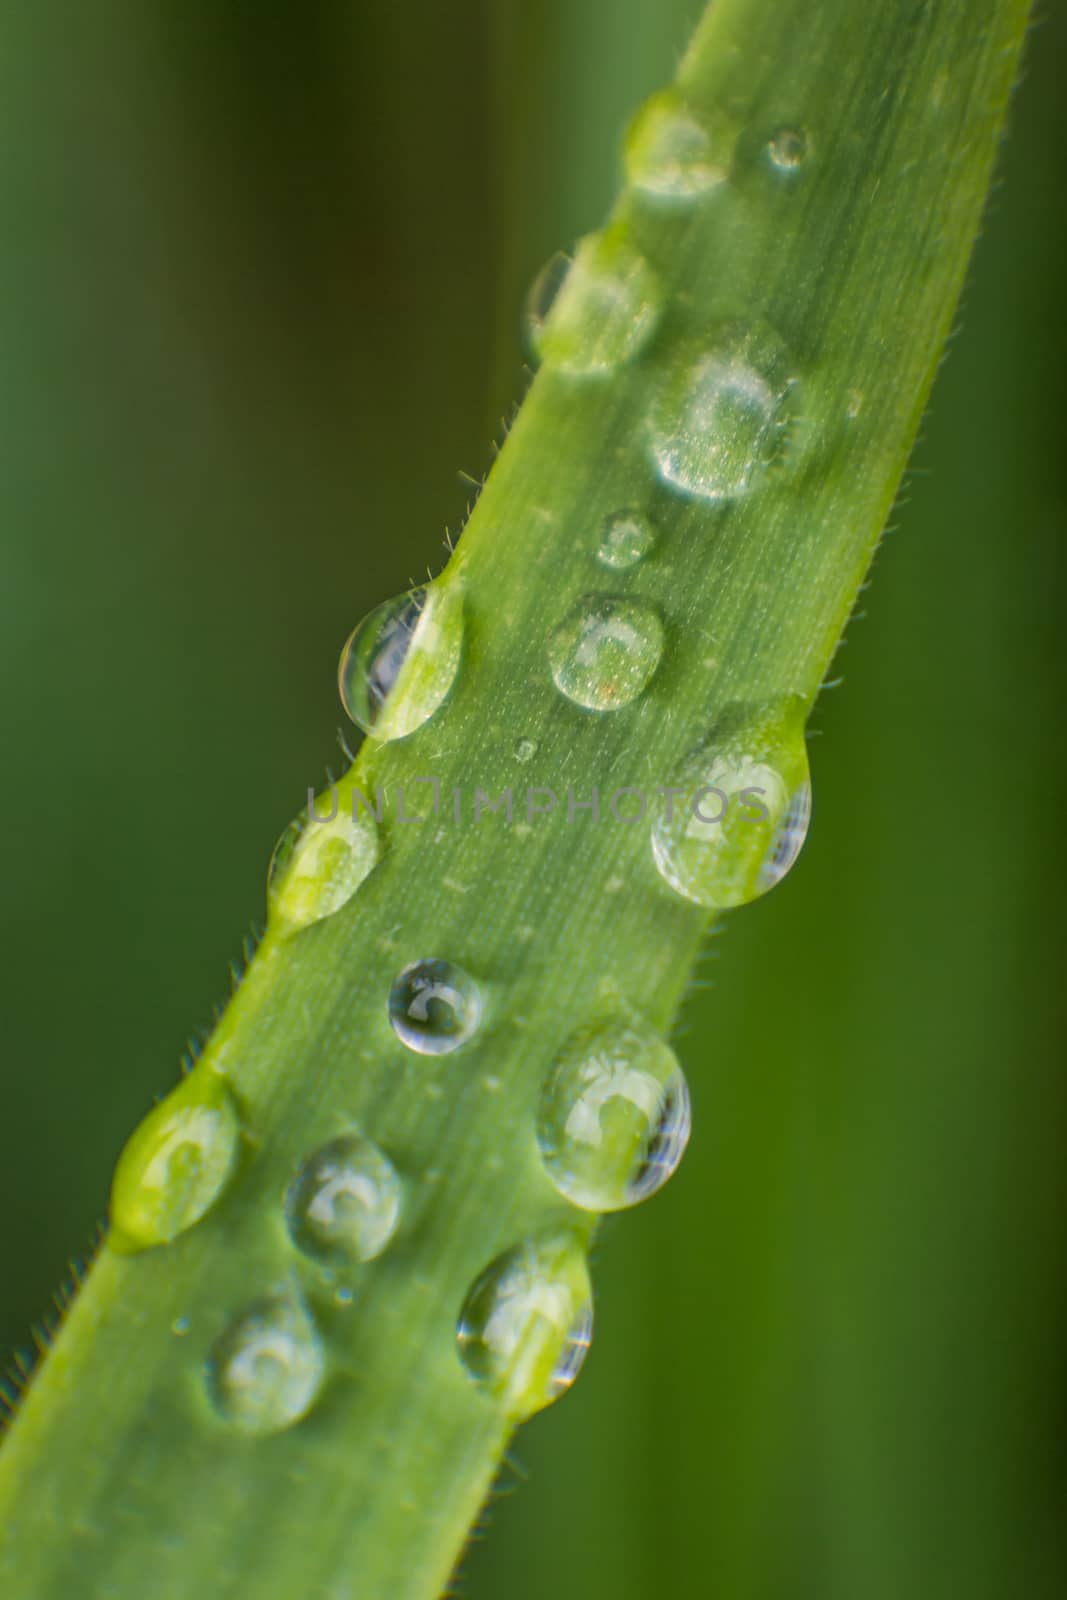 Rainwater Droplets on a Single Blade of Grass by backyard_photography